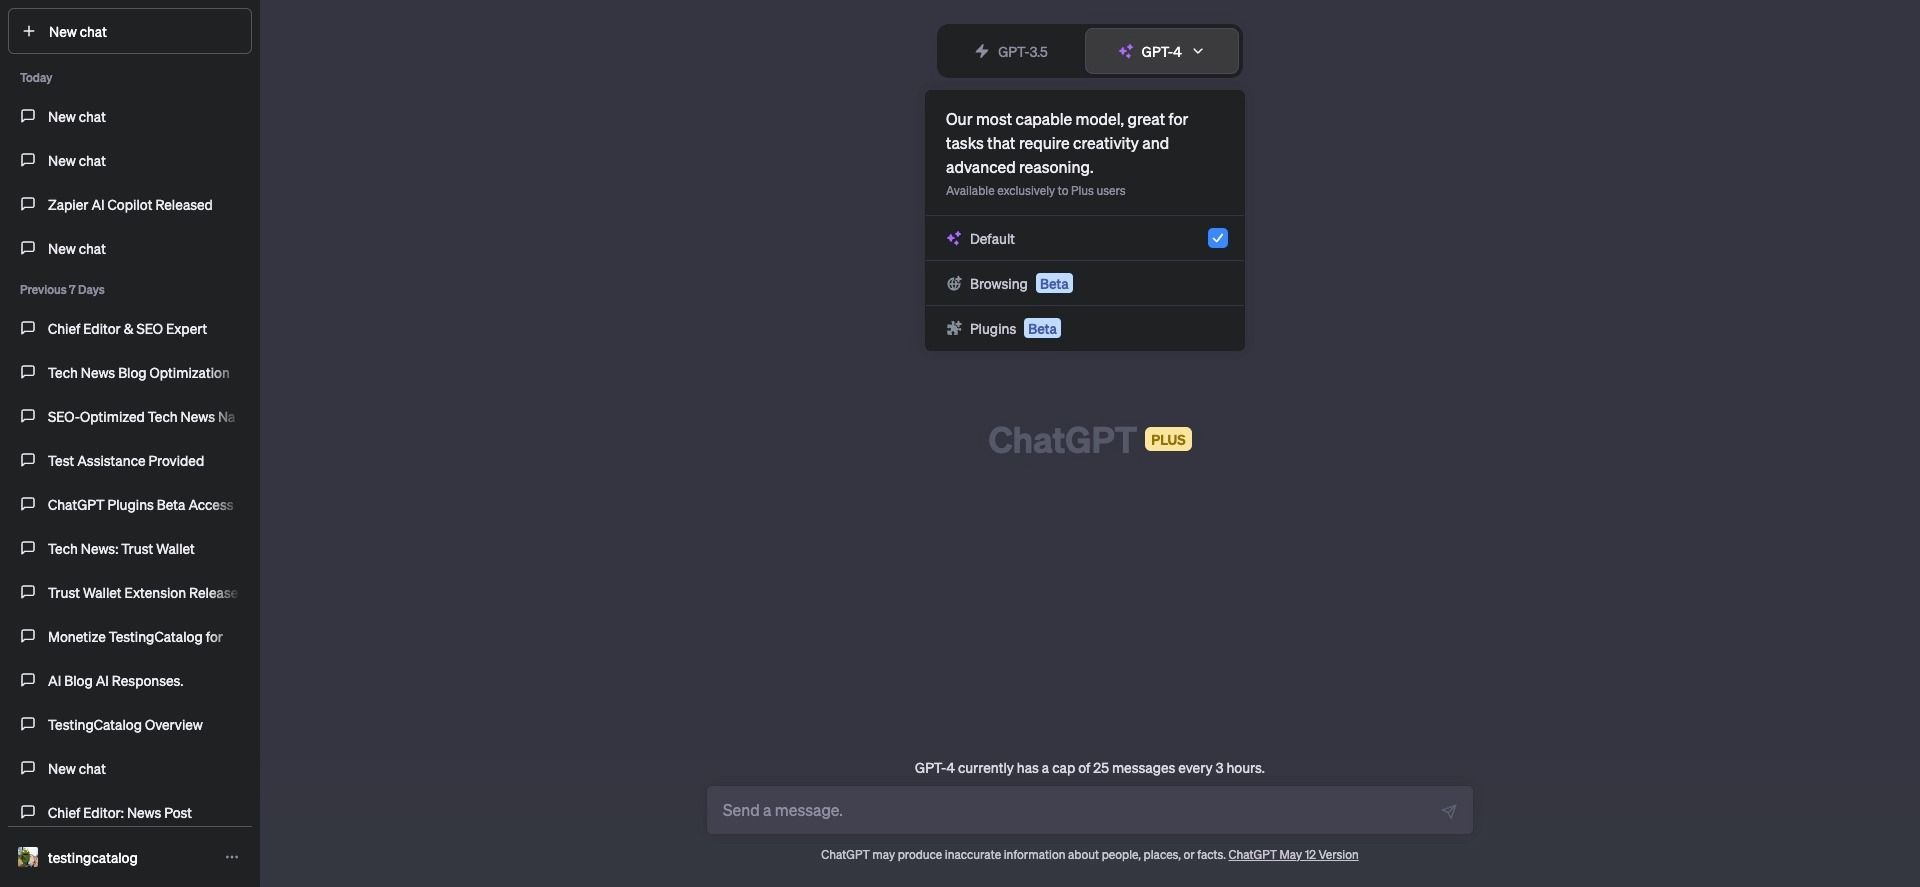 ChatGPT rolls out beta plugins and web browsing for Plus users: exploring new features and integrations